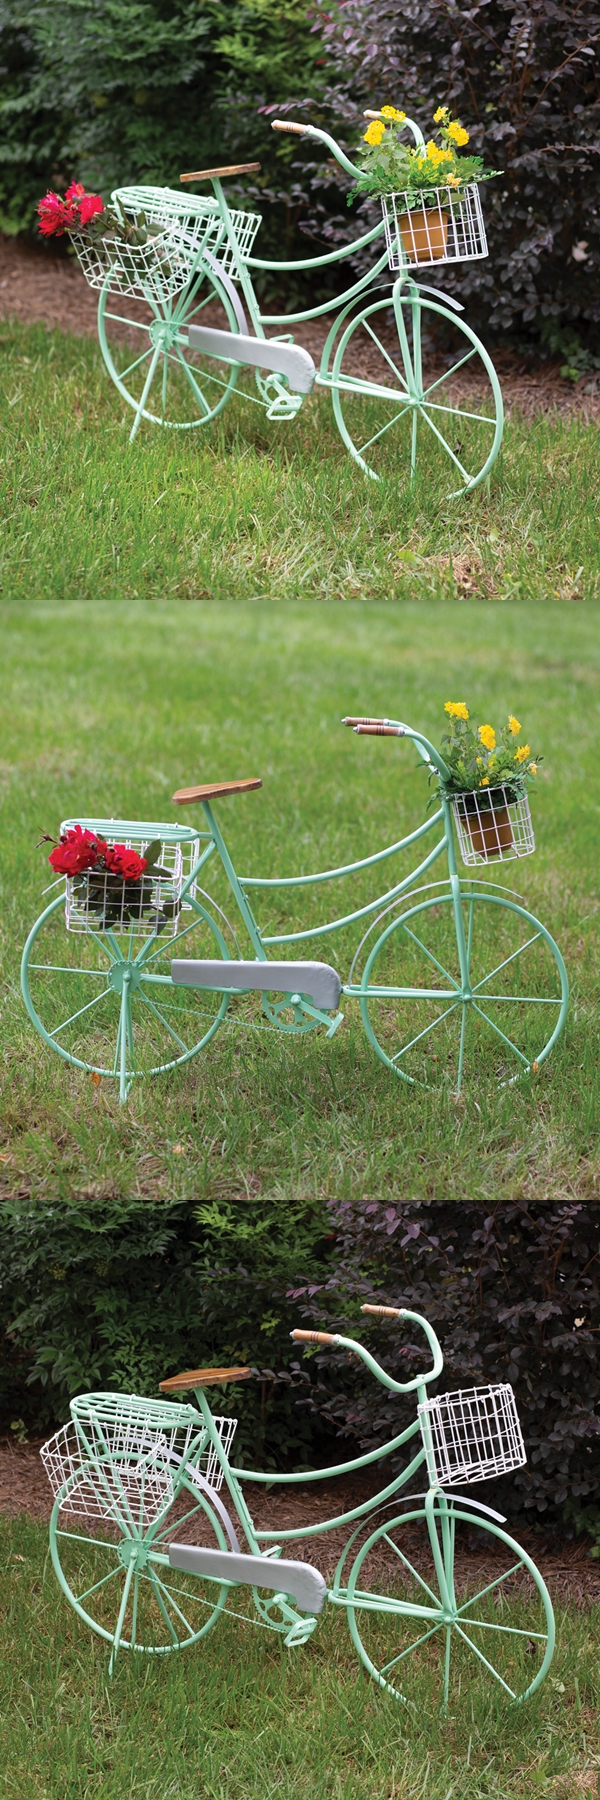 CTW Home Collection Decorative Mint Green Bicycle with Three Baskets